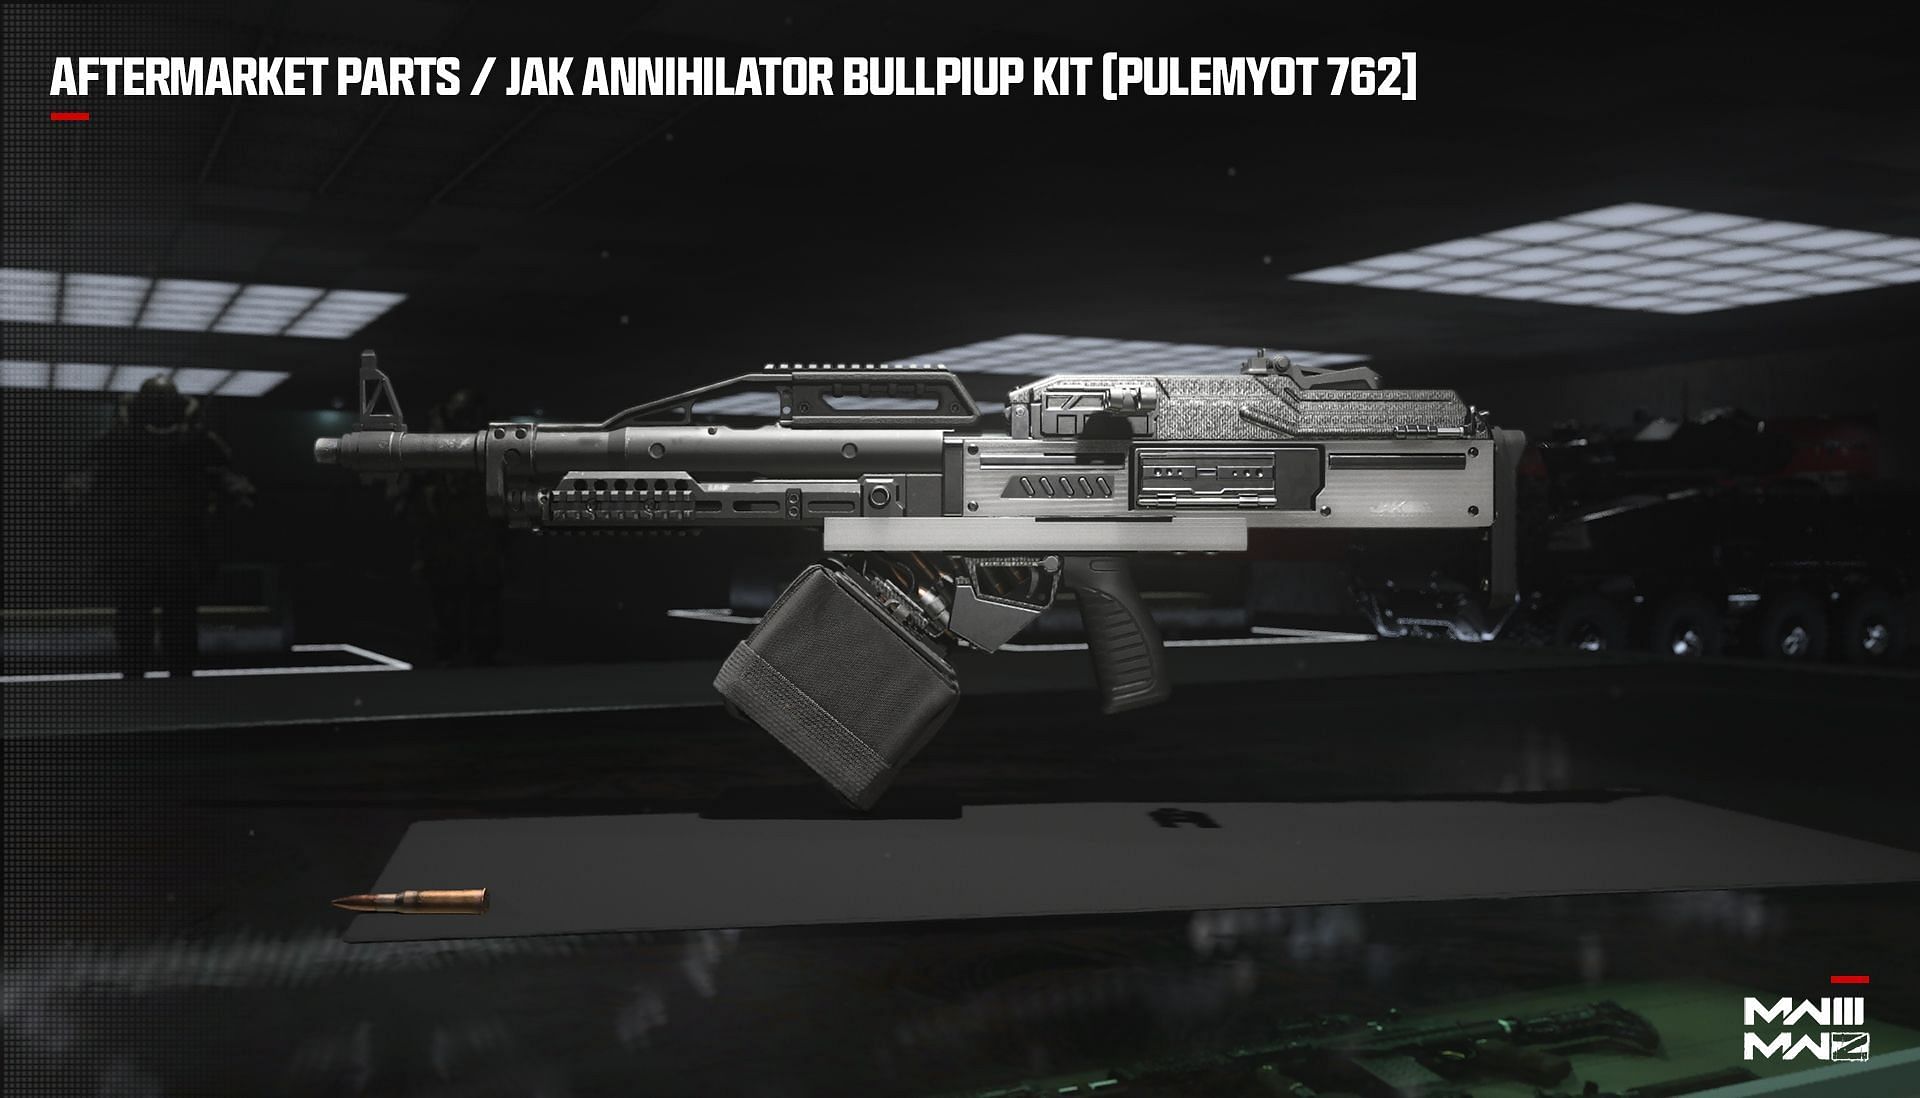 The JAK Annihilator Bullpup Kit for the Pulemyot-762 LMG in Modern Warfare 3 (Image via Activision)